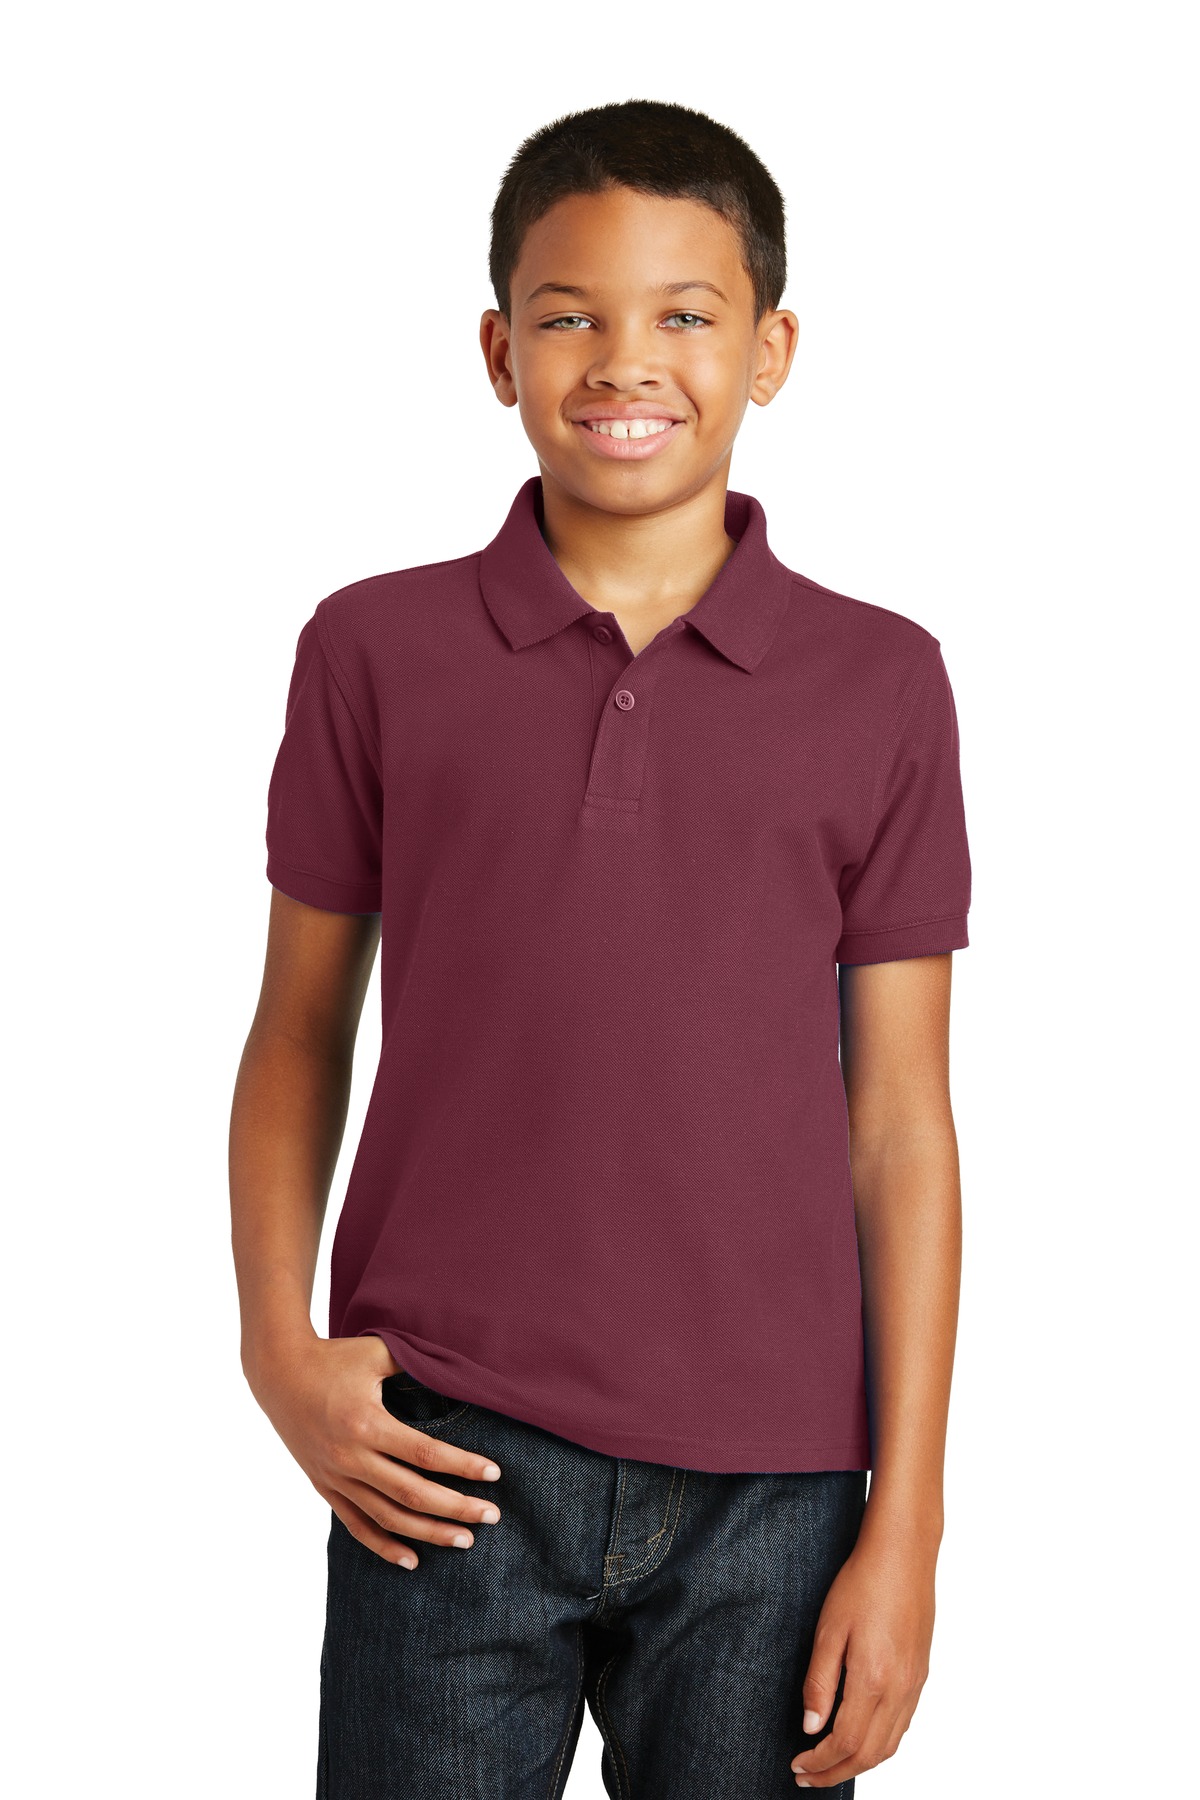 Port Authority Hospitality Youth Polos& Knits ® Youth Core Classic Pique Polo.-Port Authority